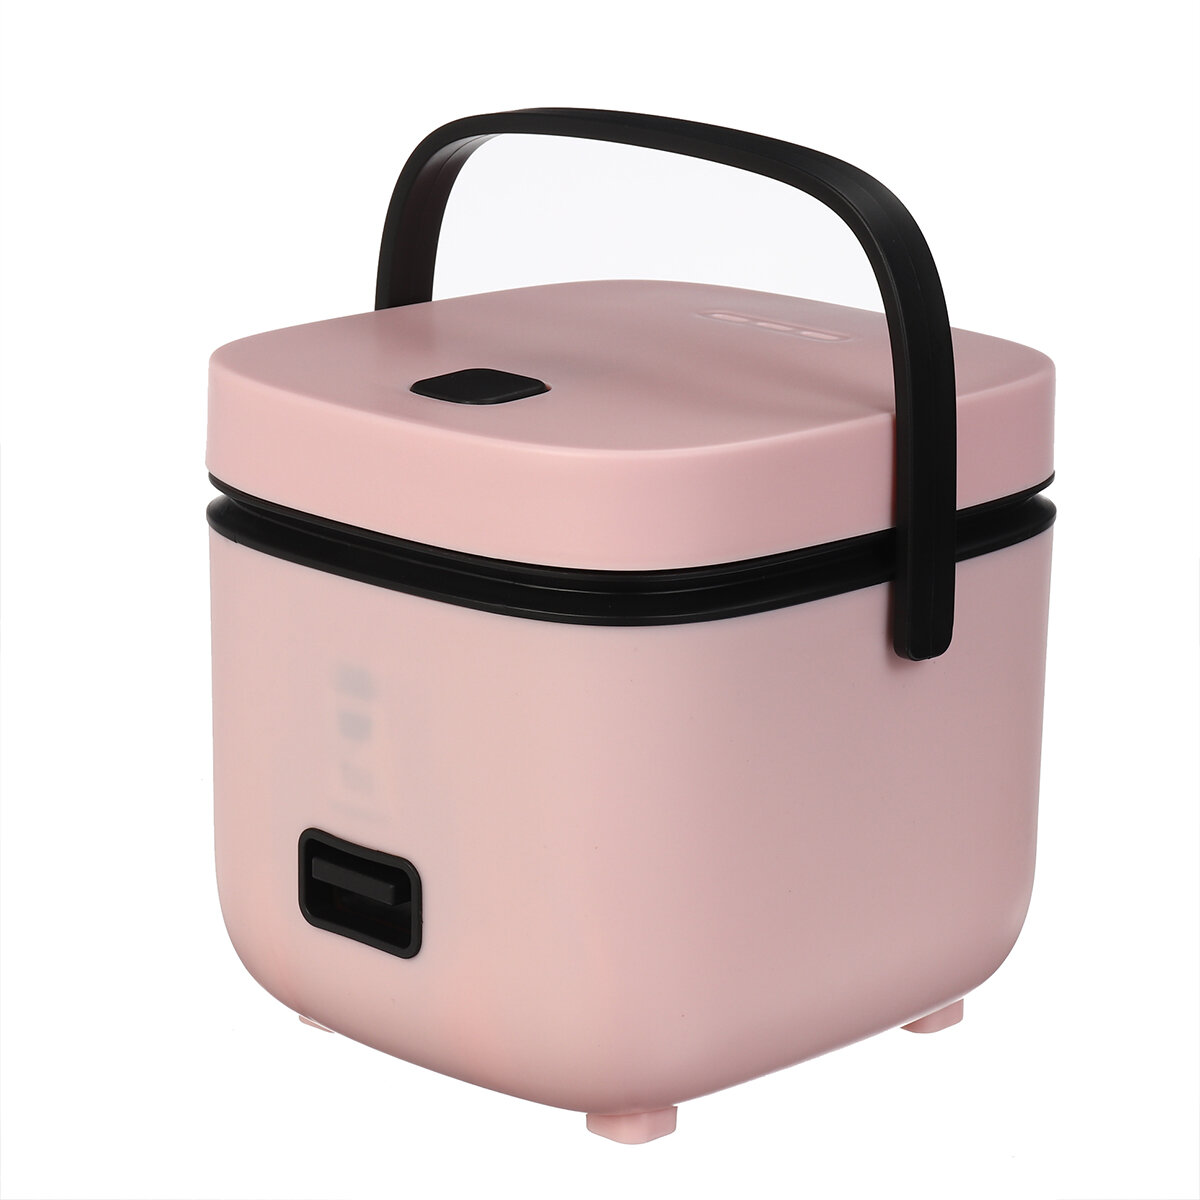 

JWS-6661B Rice Cooker 200W 1.2L Capacity Non-Stick Coating Portable Rice Cooking Machine Steamer